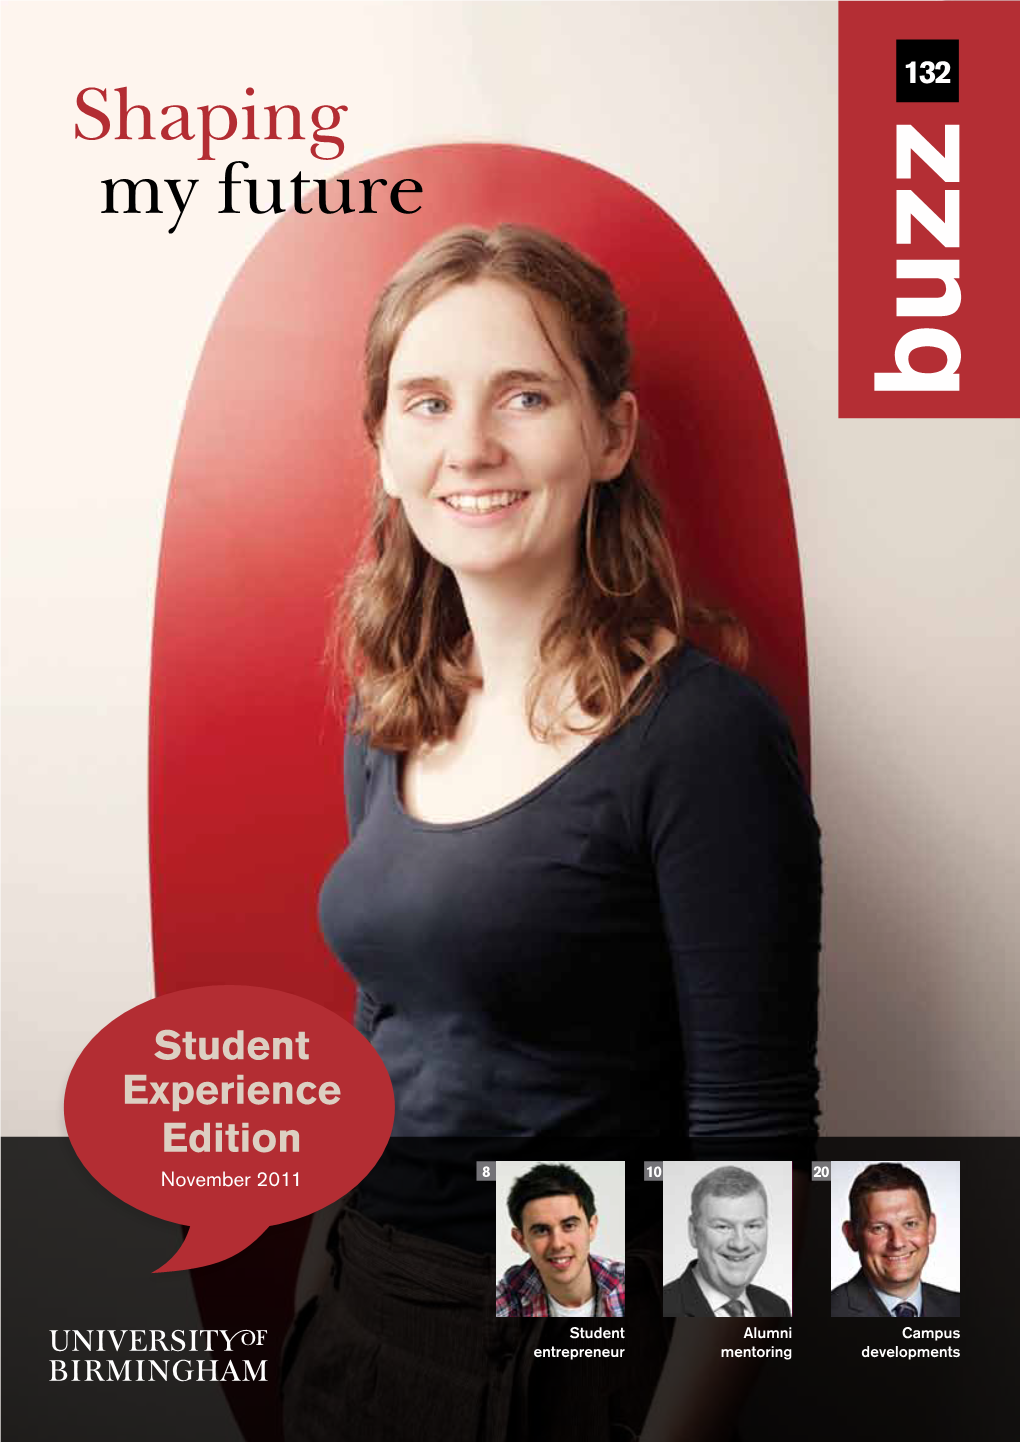 Student Experience Edition November 2011 8 10 20